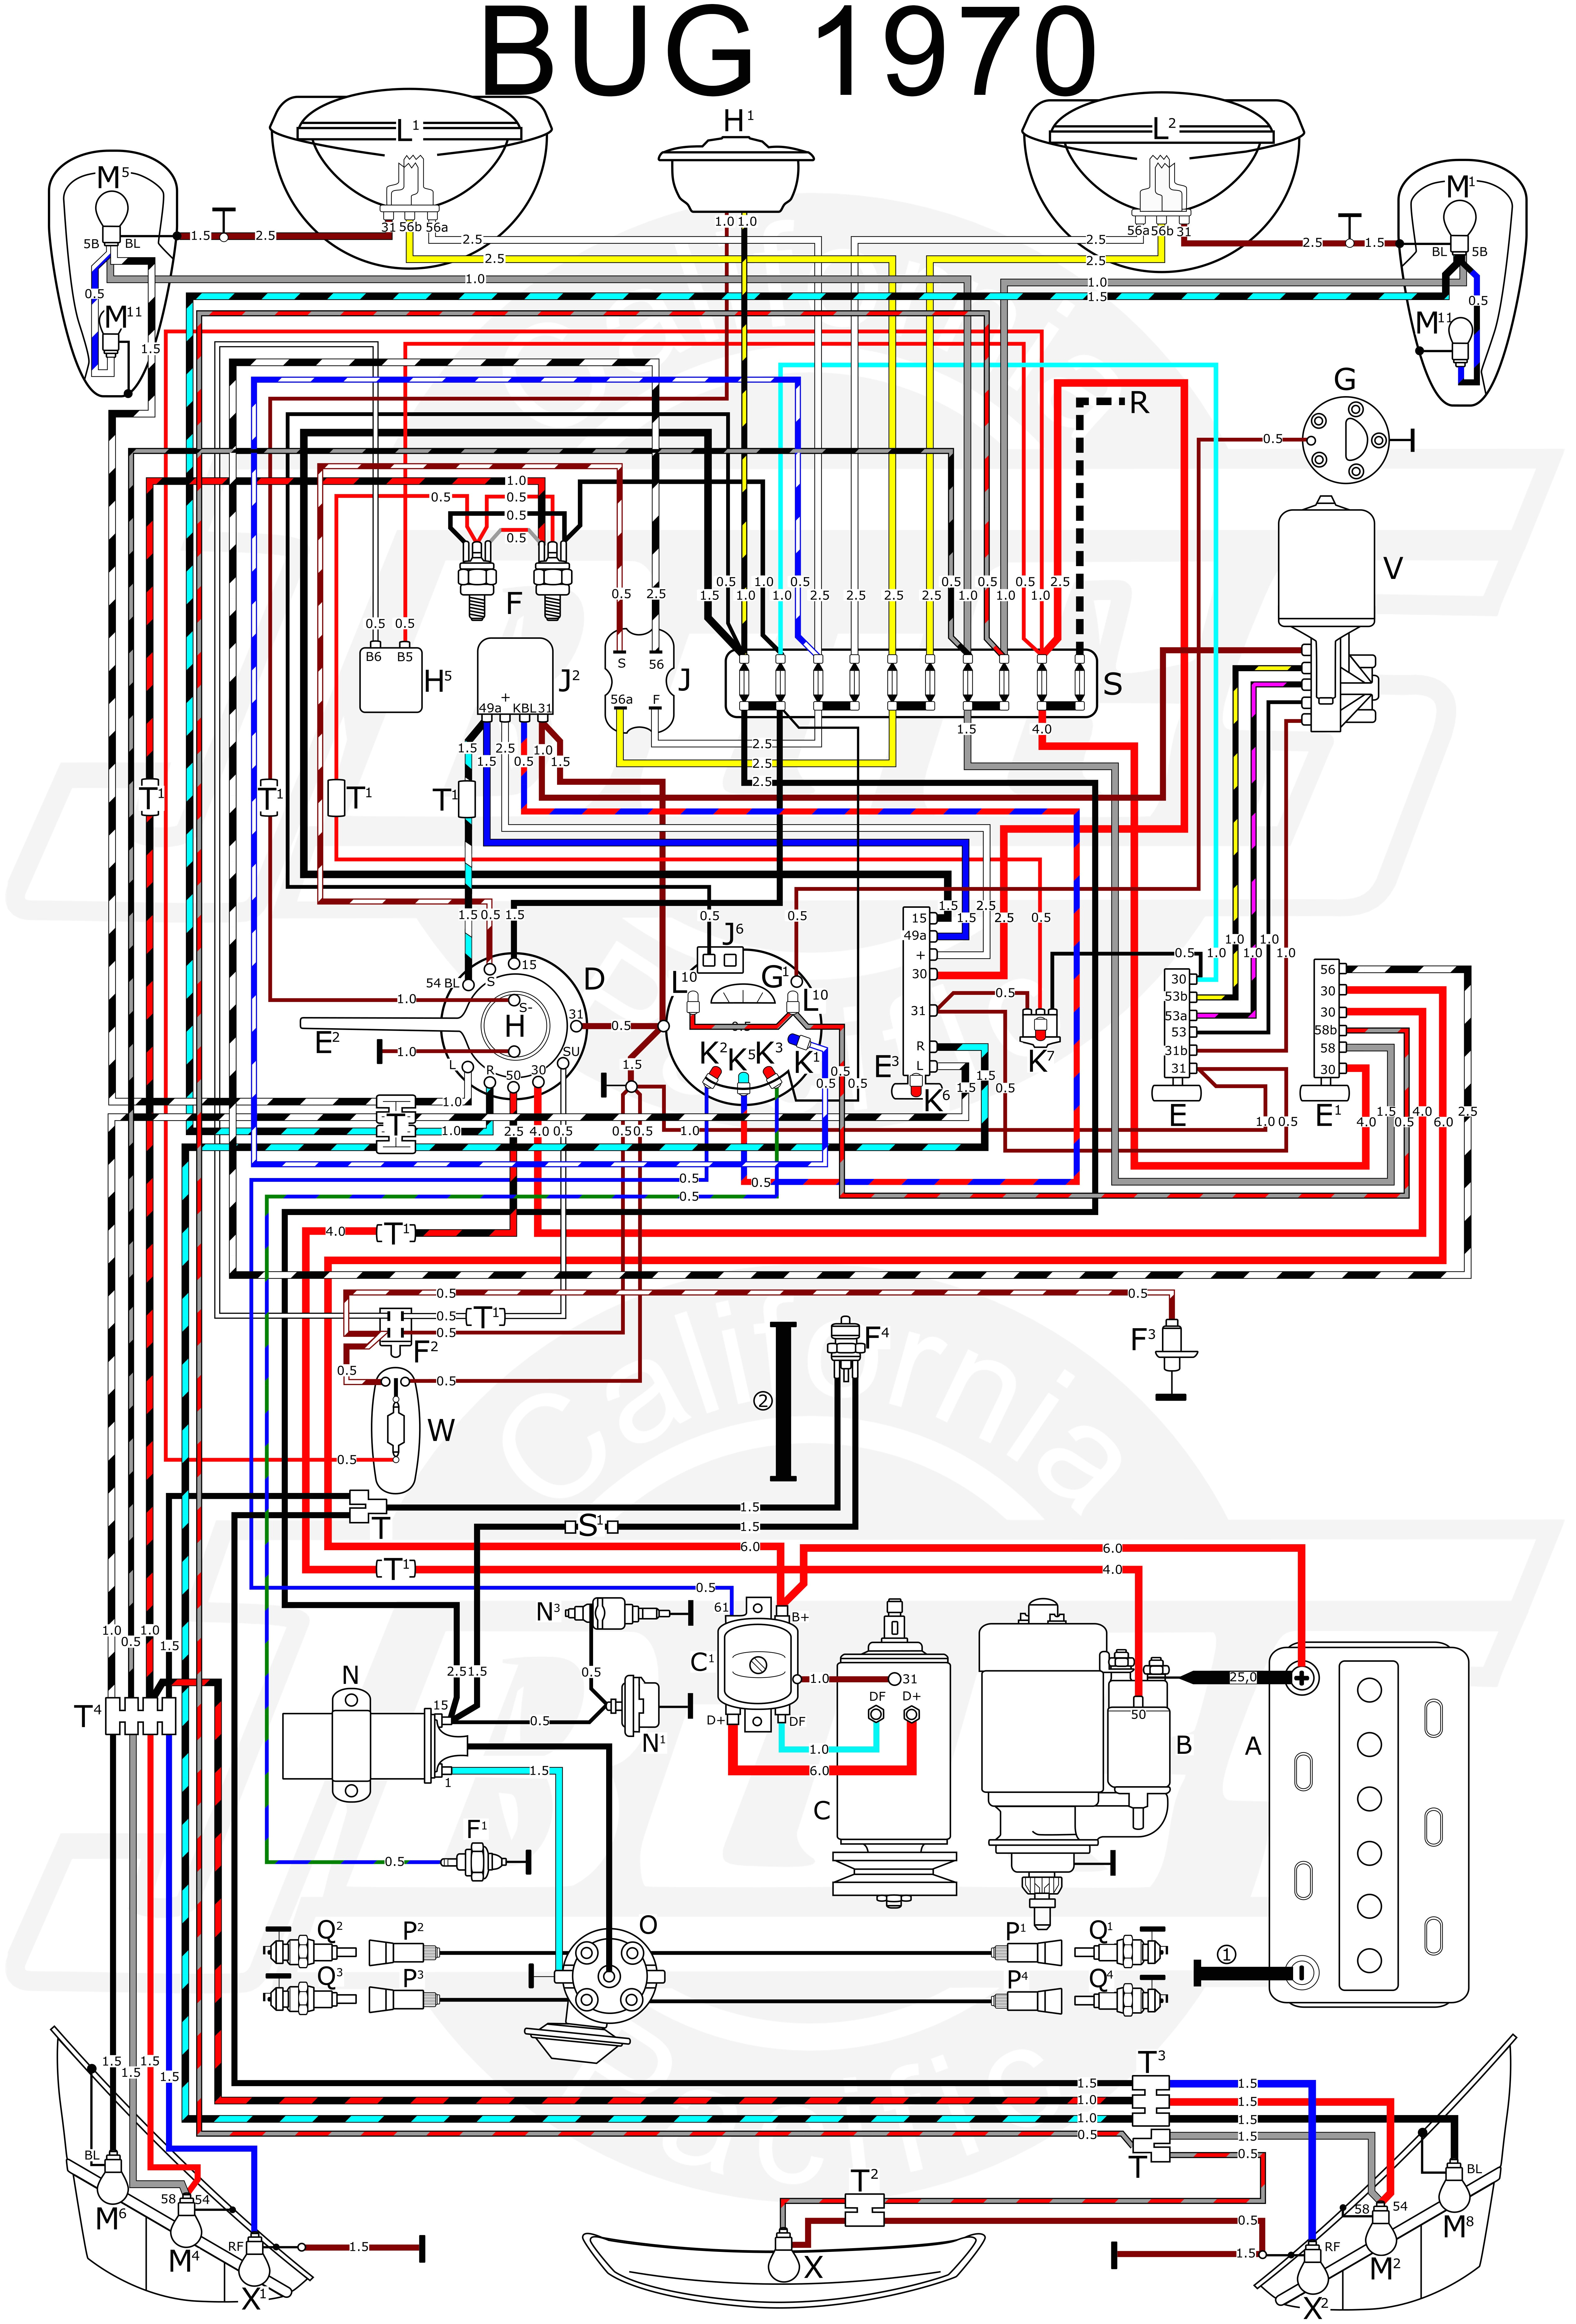 wiring diagram beetle compleat idiot wiring diagram paper 69 vw bug horn wiring 69 vw bug wiring